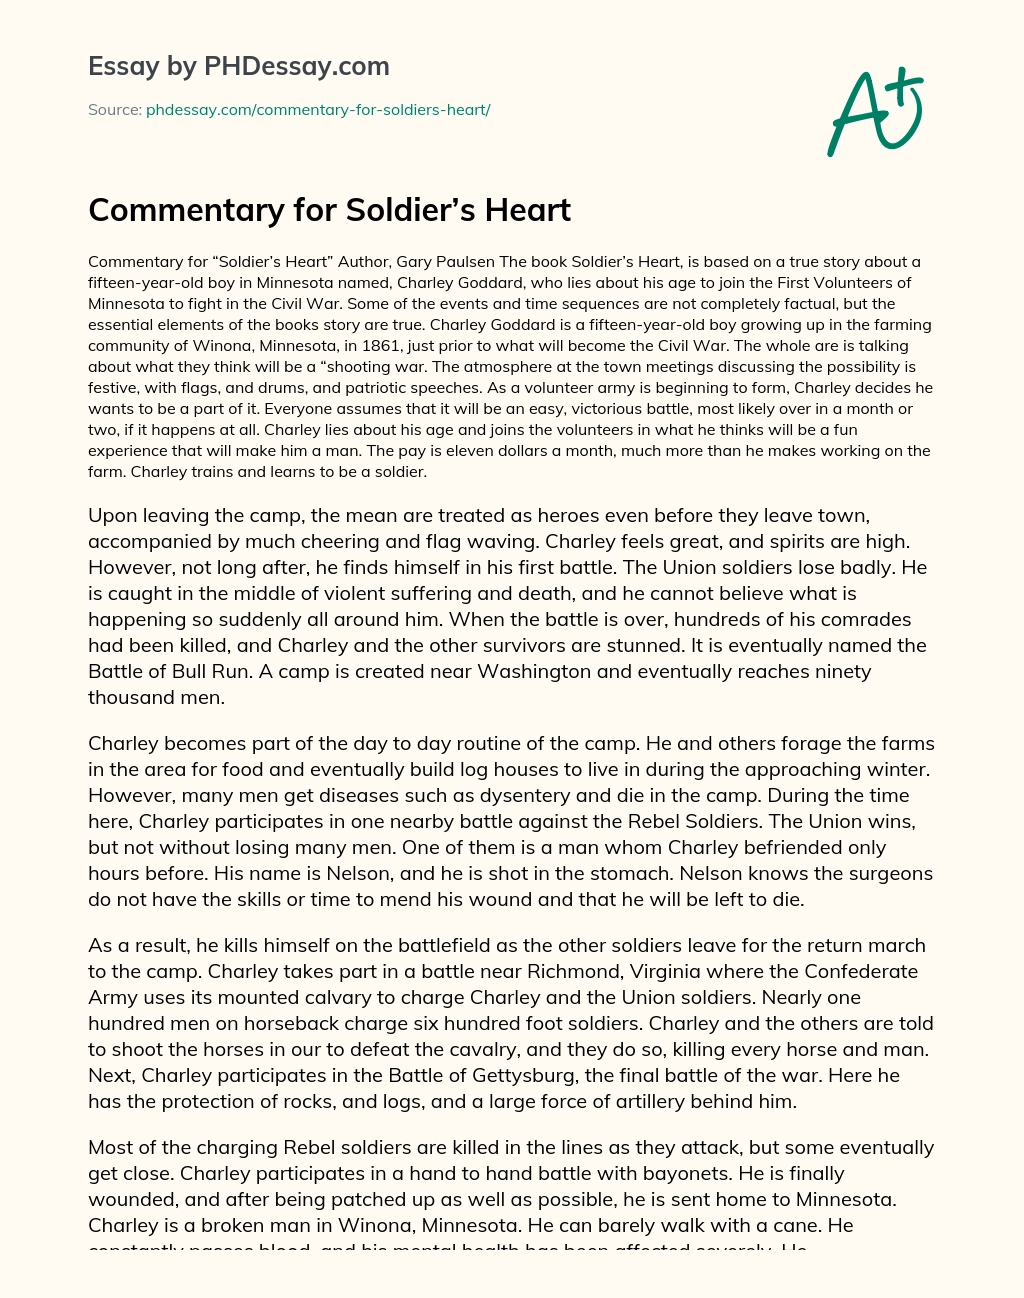 Commentary for Soldier’s Heart essay